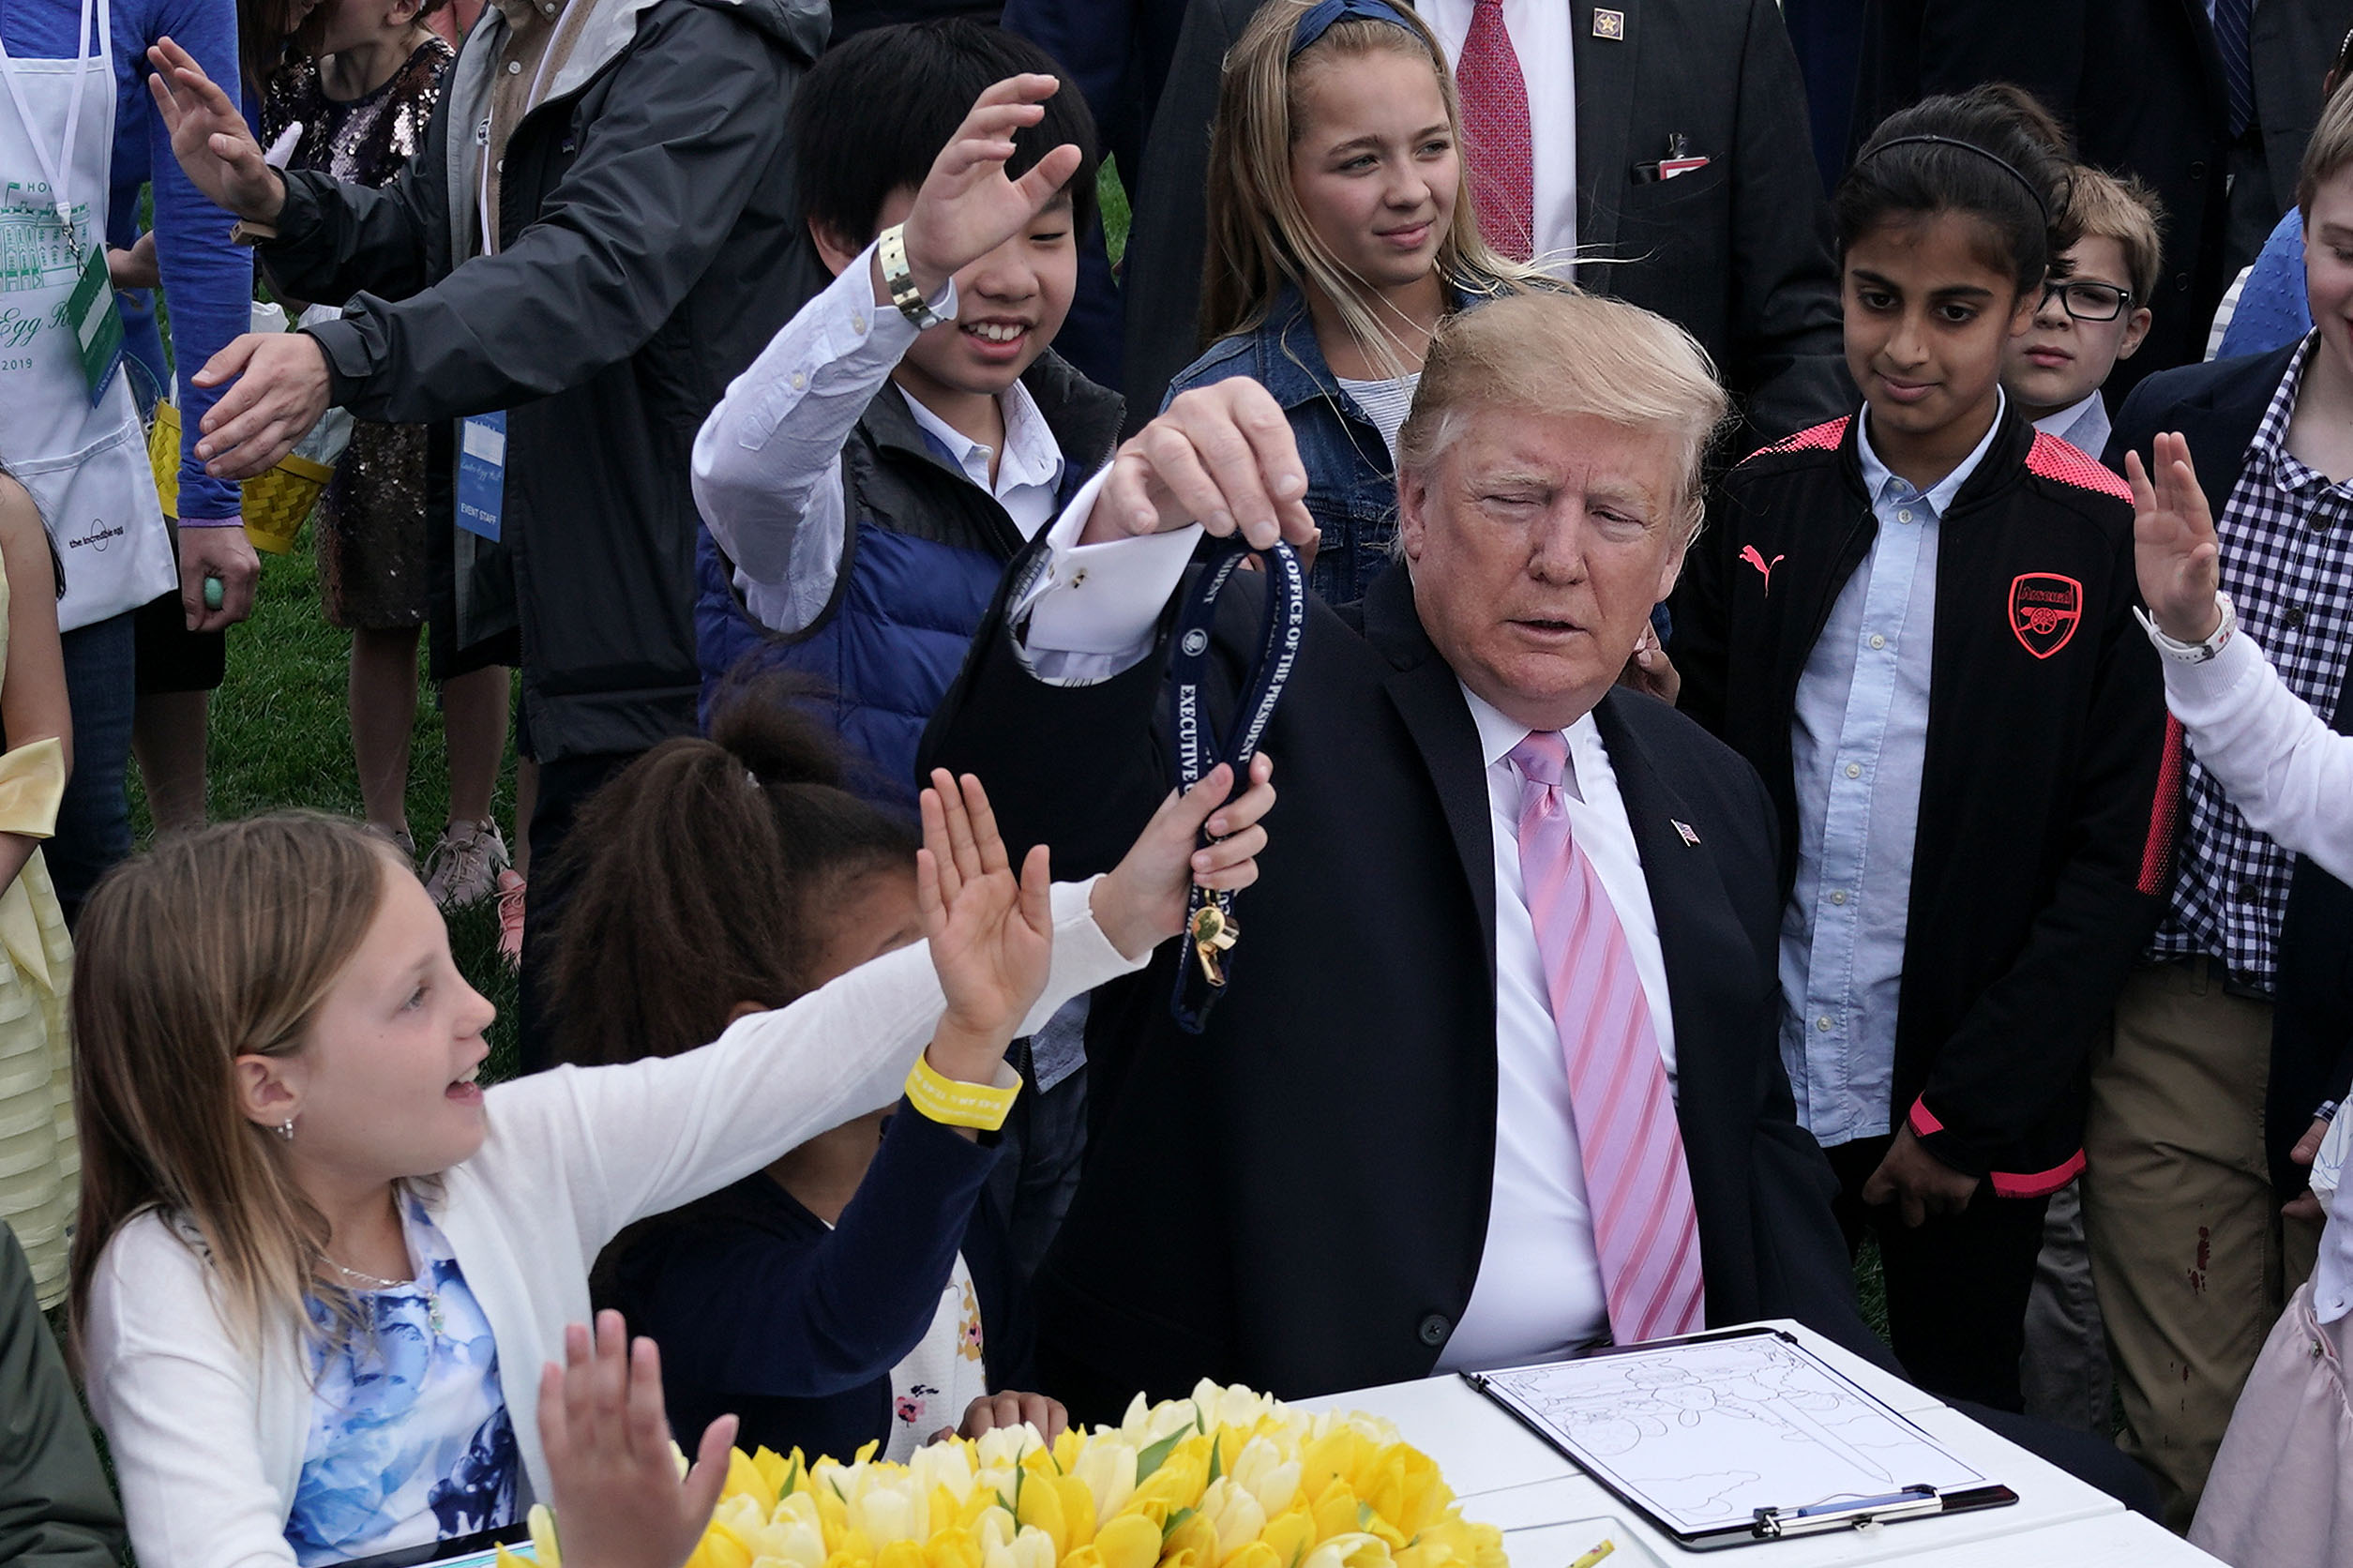 WASHINGTON, DC - APRIL 22: U.S. President Donald Trump hands out the whistle that he blew to children during the 141st Easter Egg Roll on the South Lawn of the White House April 22, 2019 in Washington, DC. About 30,000 people are expected to attend the annual tradition of rolling colored eggs down the South Lawn of the White House that dates back to the Rutherford B. Hayes Administration in 1878. (Photo by Alex Wong/Getty Images)